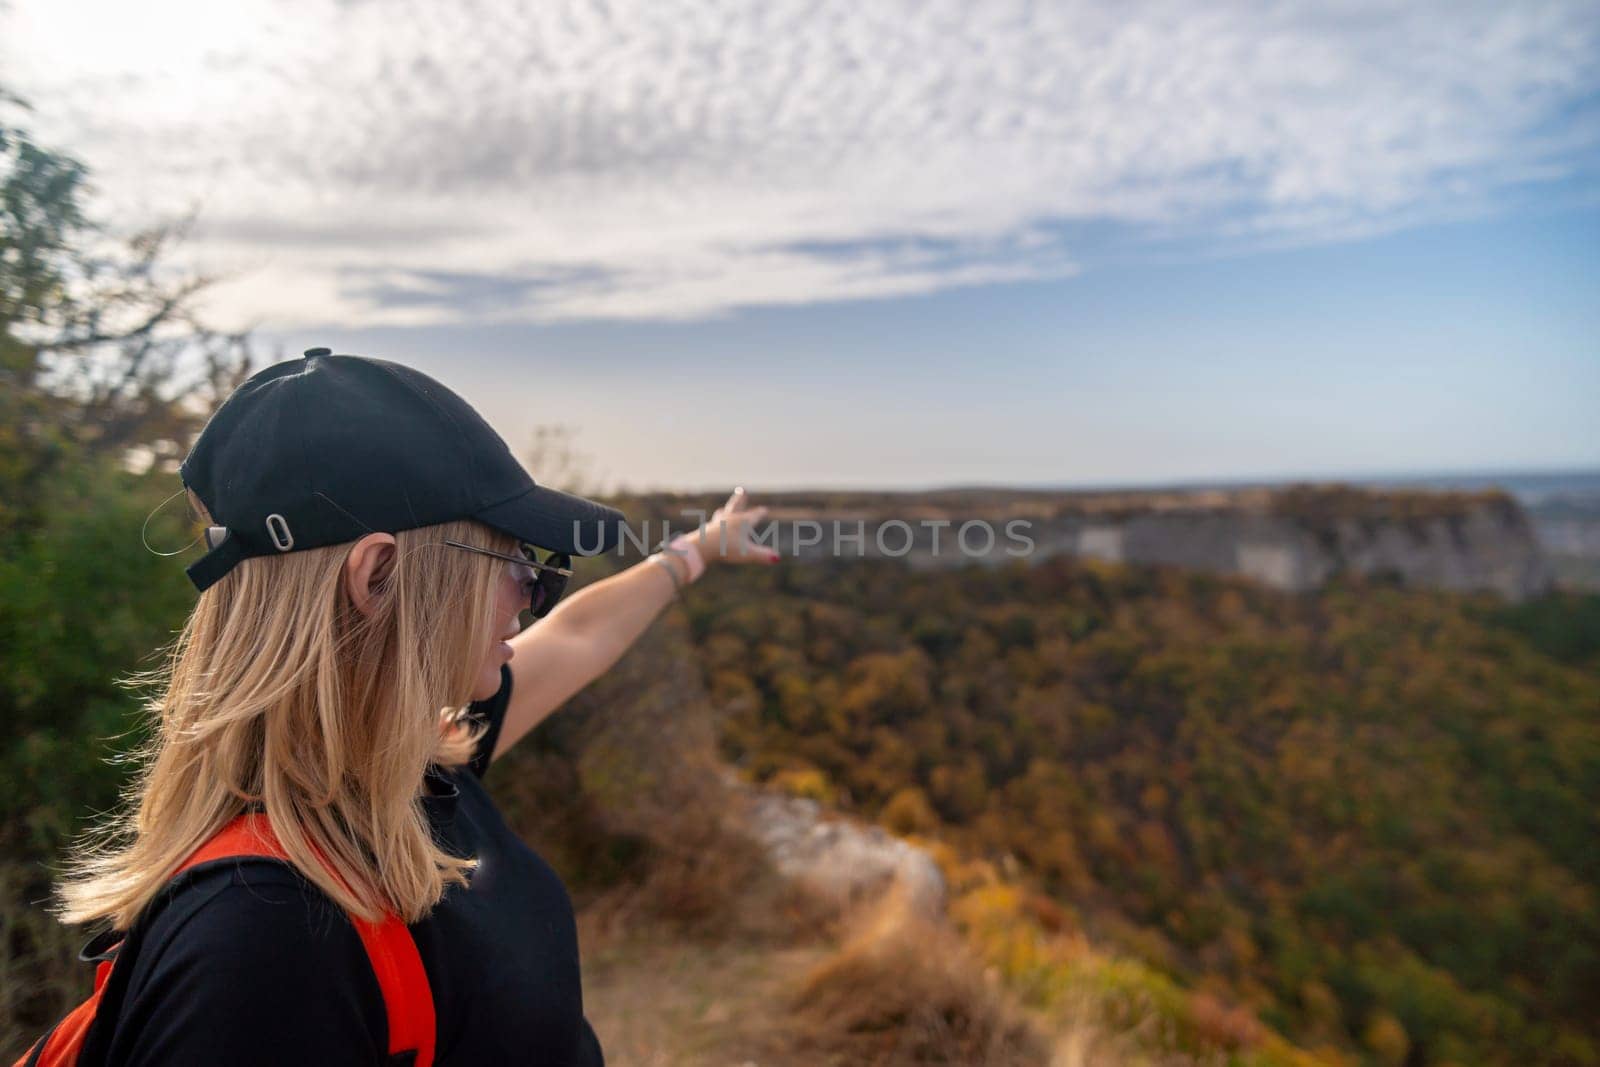 woman on mountain peak looking in beautiful mountain valley in autumn. Landscape with sporty young woman, blu sky in fall. Hiking. Nature.